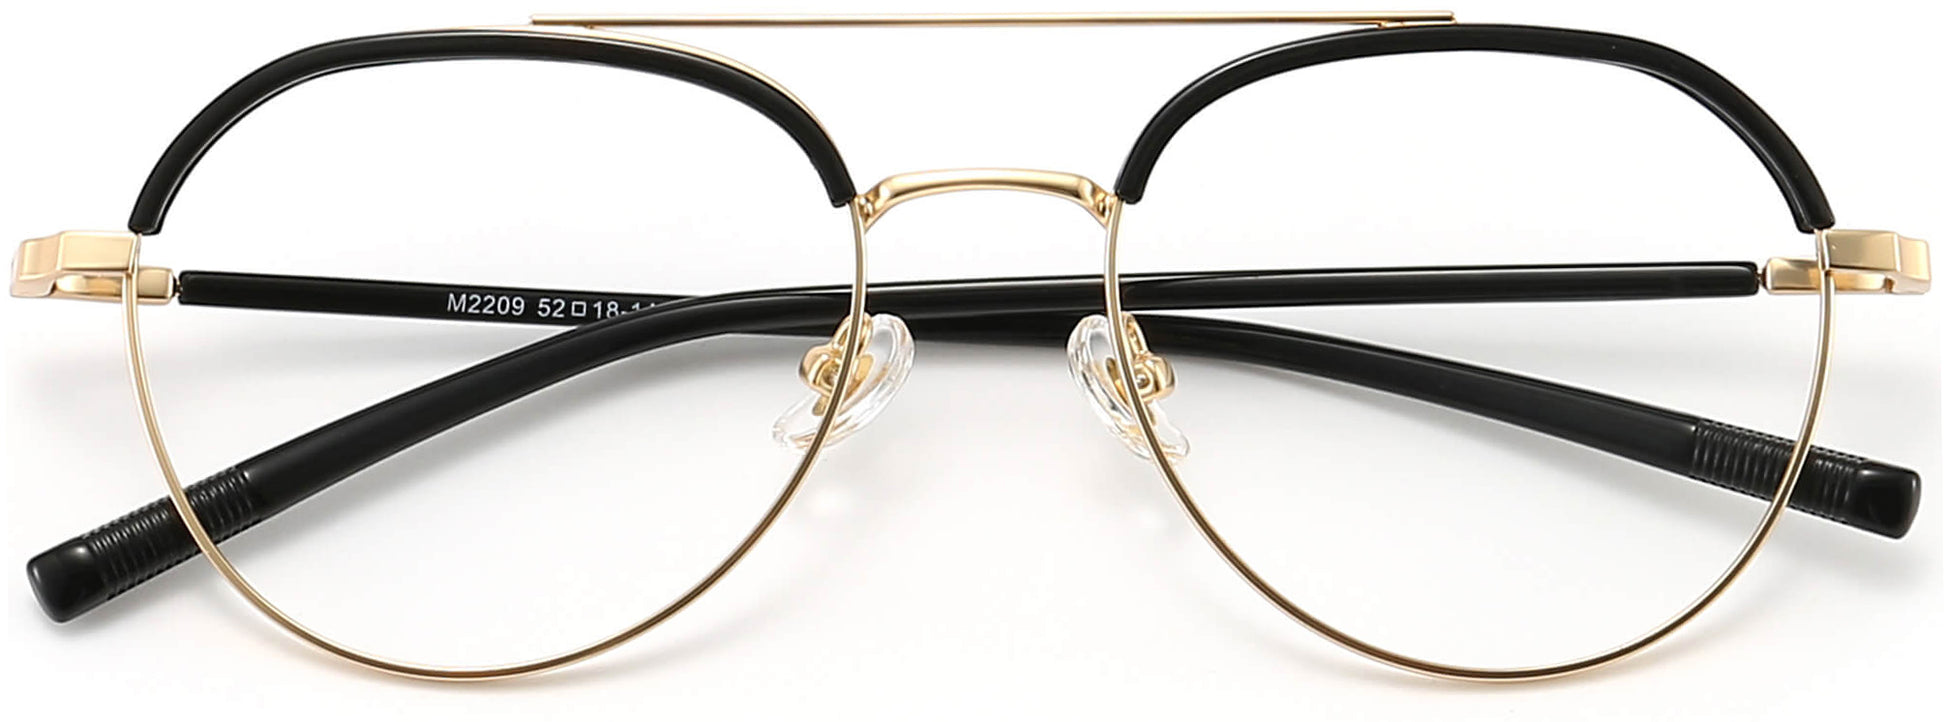 Sutton Round Black Eyeglasses from ANRRI, closed view